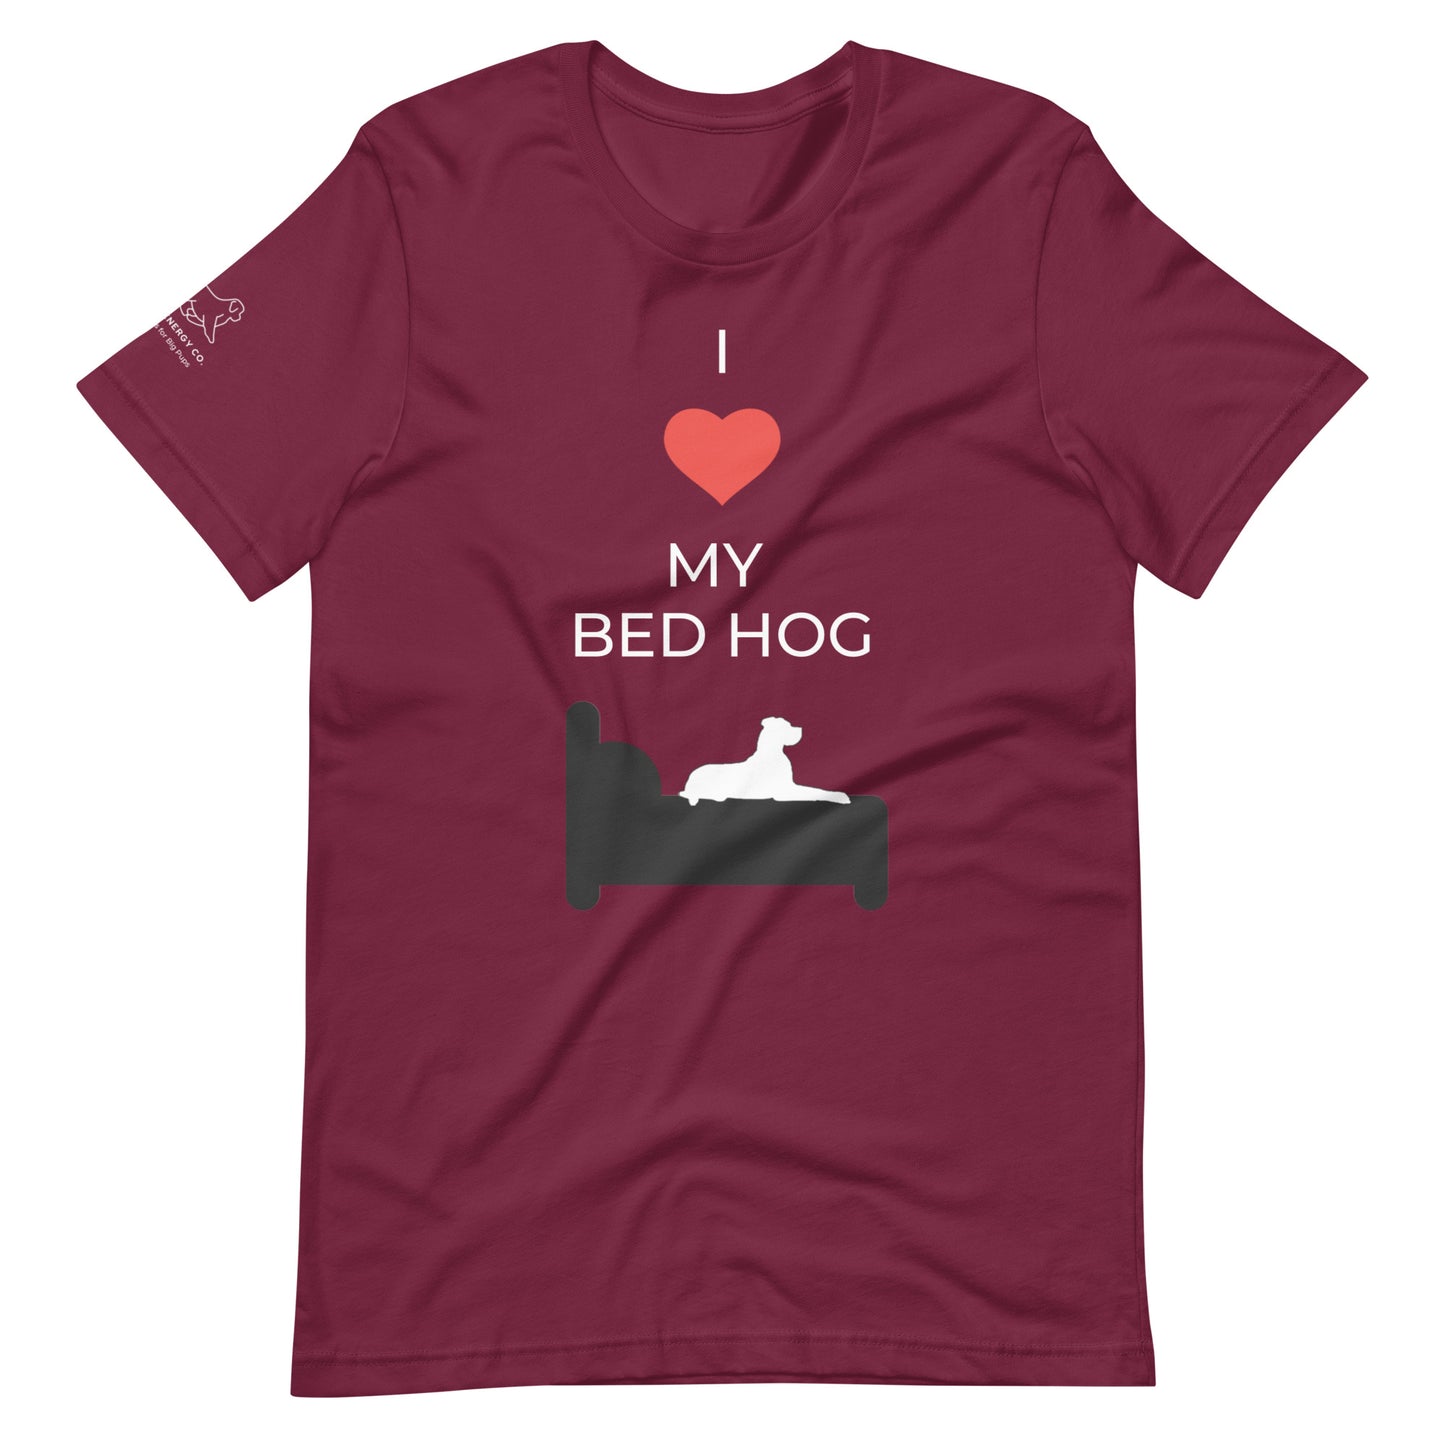 Front of a maroon t-shirt that reads "I love my bed hog" in white text over an illustration that is the white silhouette of a large dog laying on the dark silhouette of a bed. The word "love" is replaced by a red heart symbol.